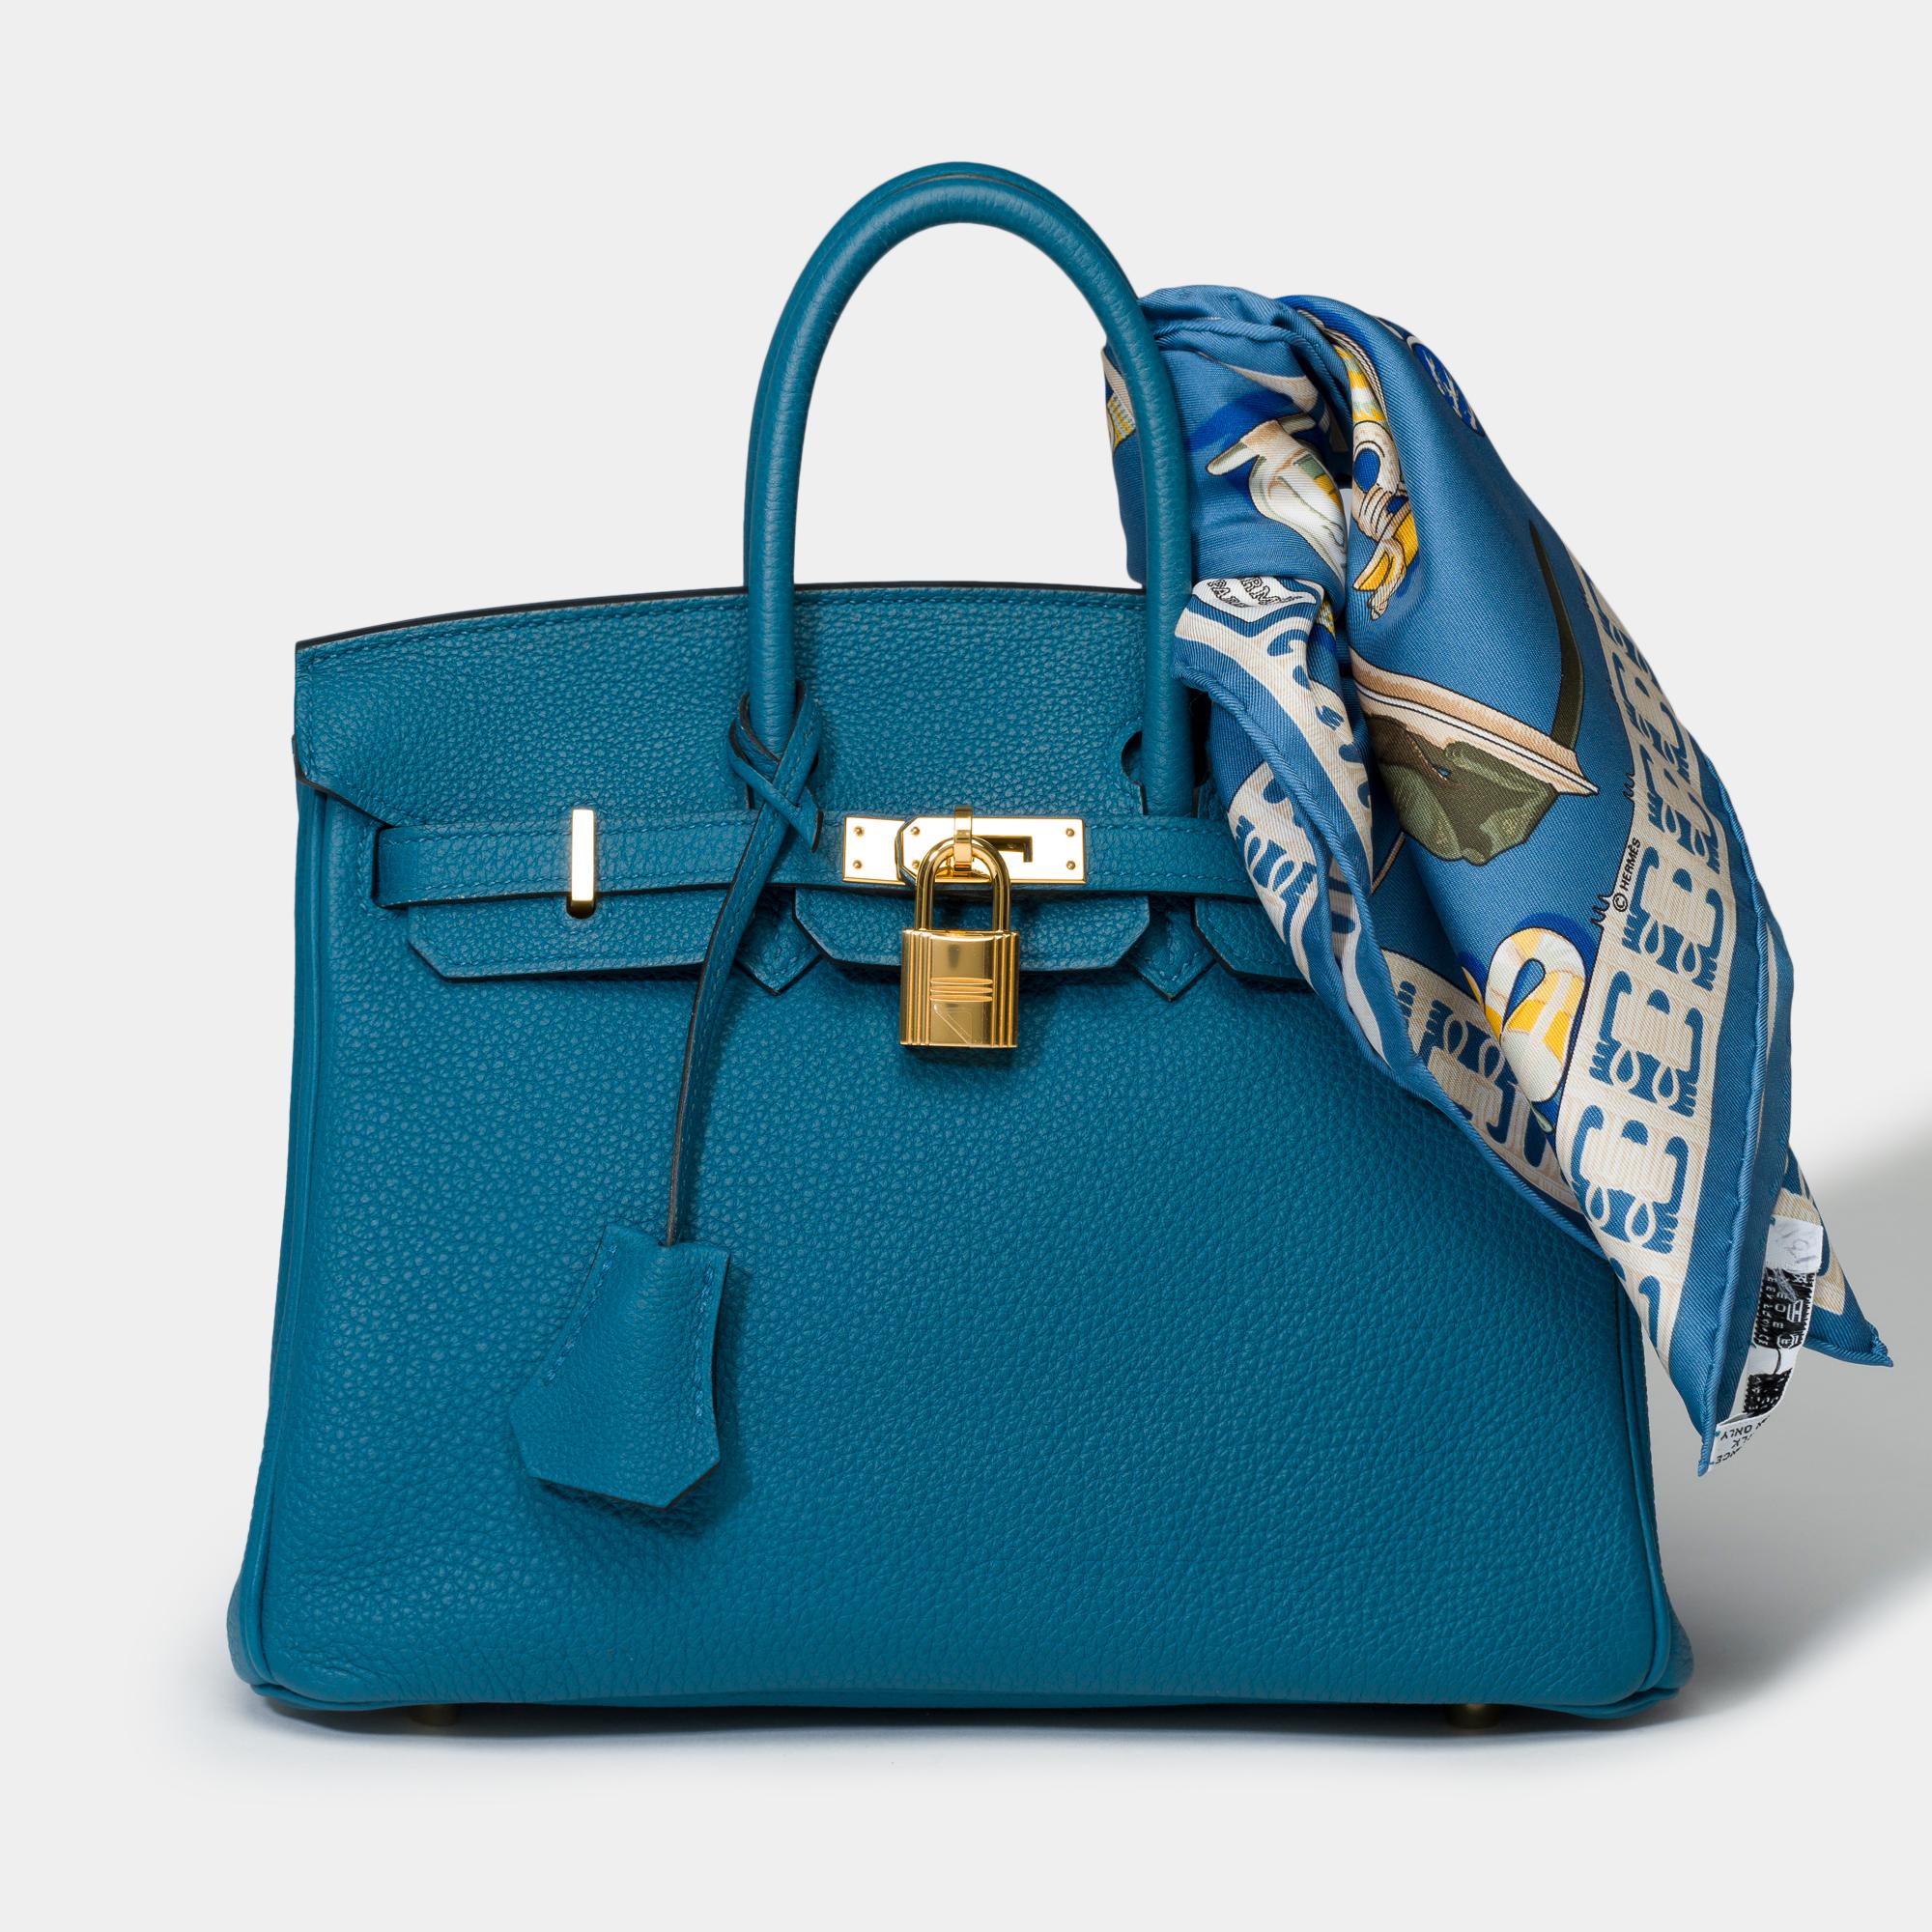 Exceptional​ ​Handbag​ ​Birkin​ ​25​ ​leather​ ​Togo​ ​Cobalt​ ​Blue,​ ​gold​ ​plated​ ​metal​ ​trim​ ​,​ ​double​ ​handle​ ​blue​ ​leather​ ​allowing​ ​hand​ ​carry

Flap​ ​closure
Blue​ ​leather​ ​inner​ ​lining​ ​,​ ​a​ ​zippered​ ​pocket,​ ​a​